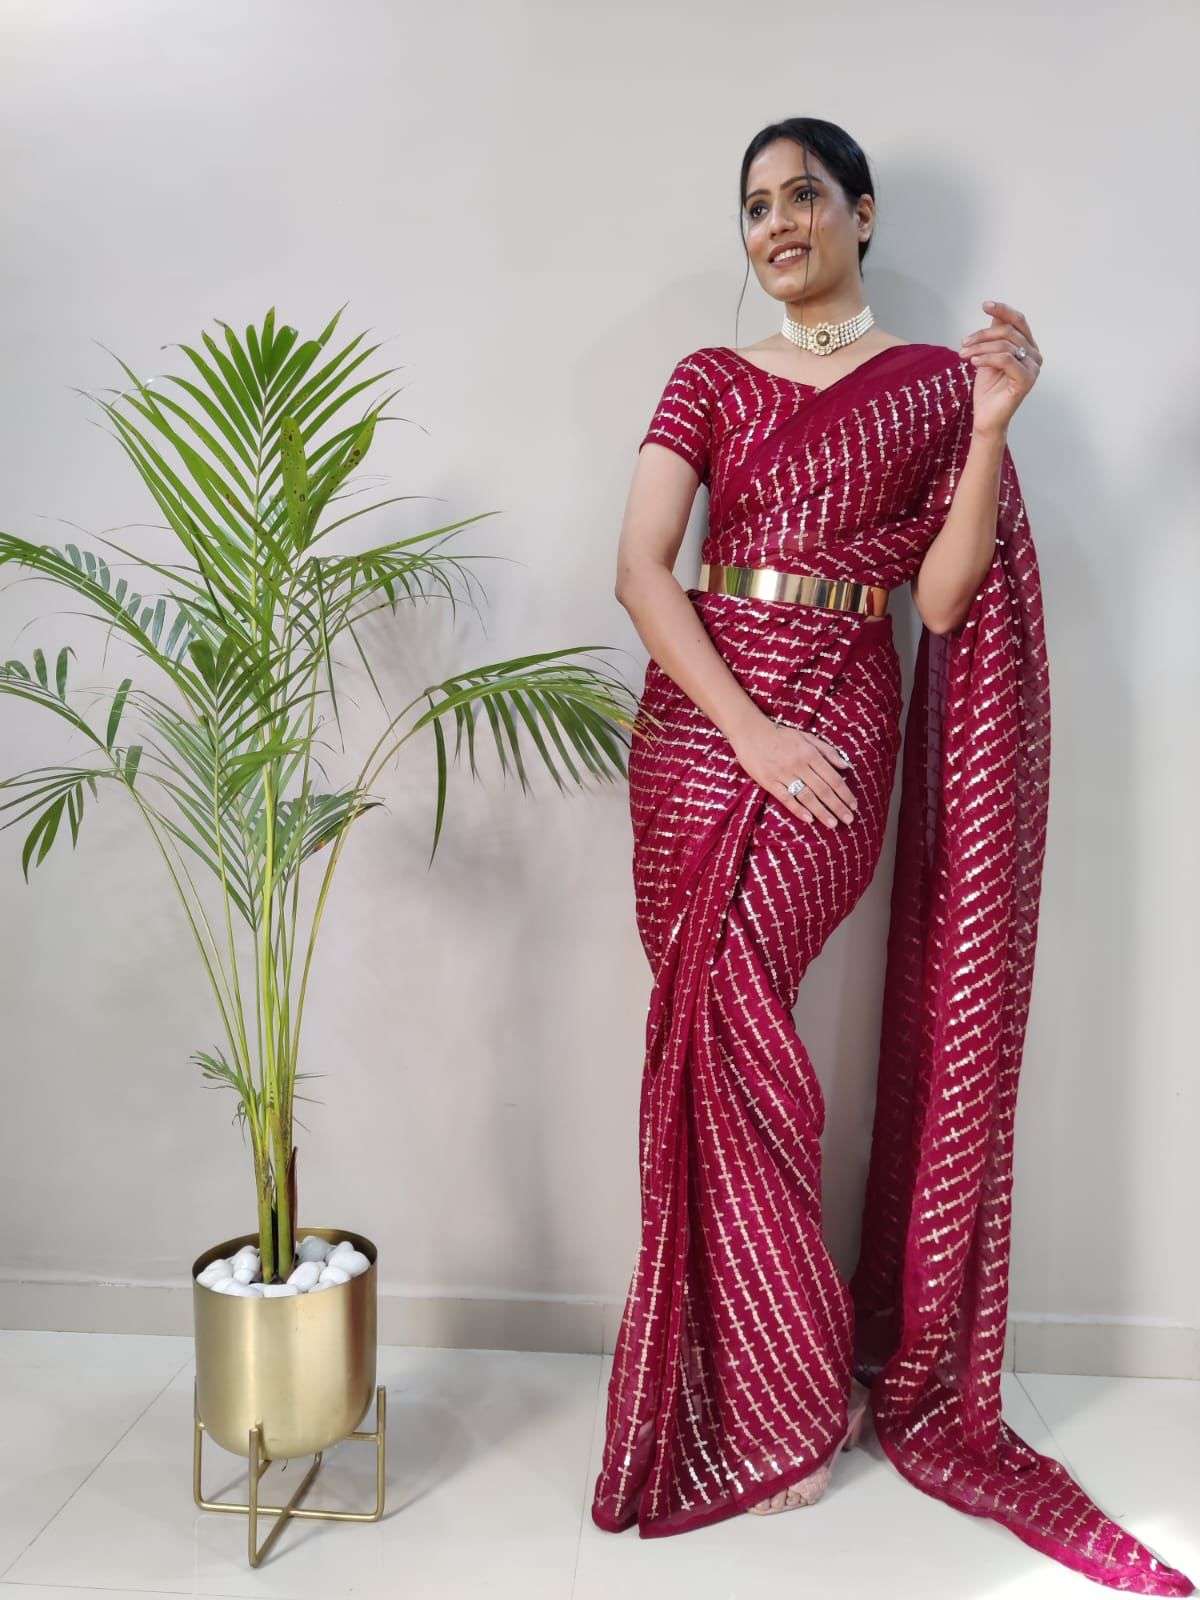 ready to wear saree beautifull with belt designer ready to wear saree in affordable price code hc 633 designer ready to wear with belt in affordable price